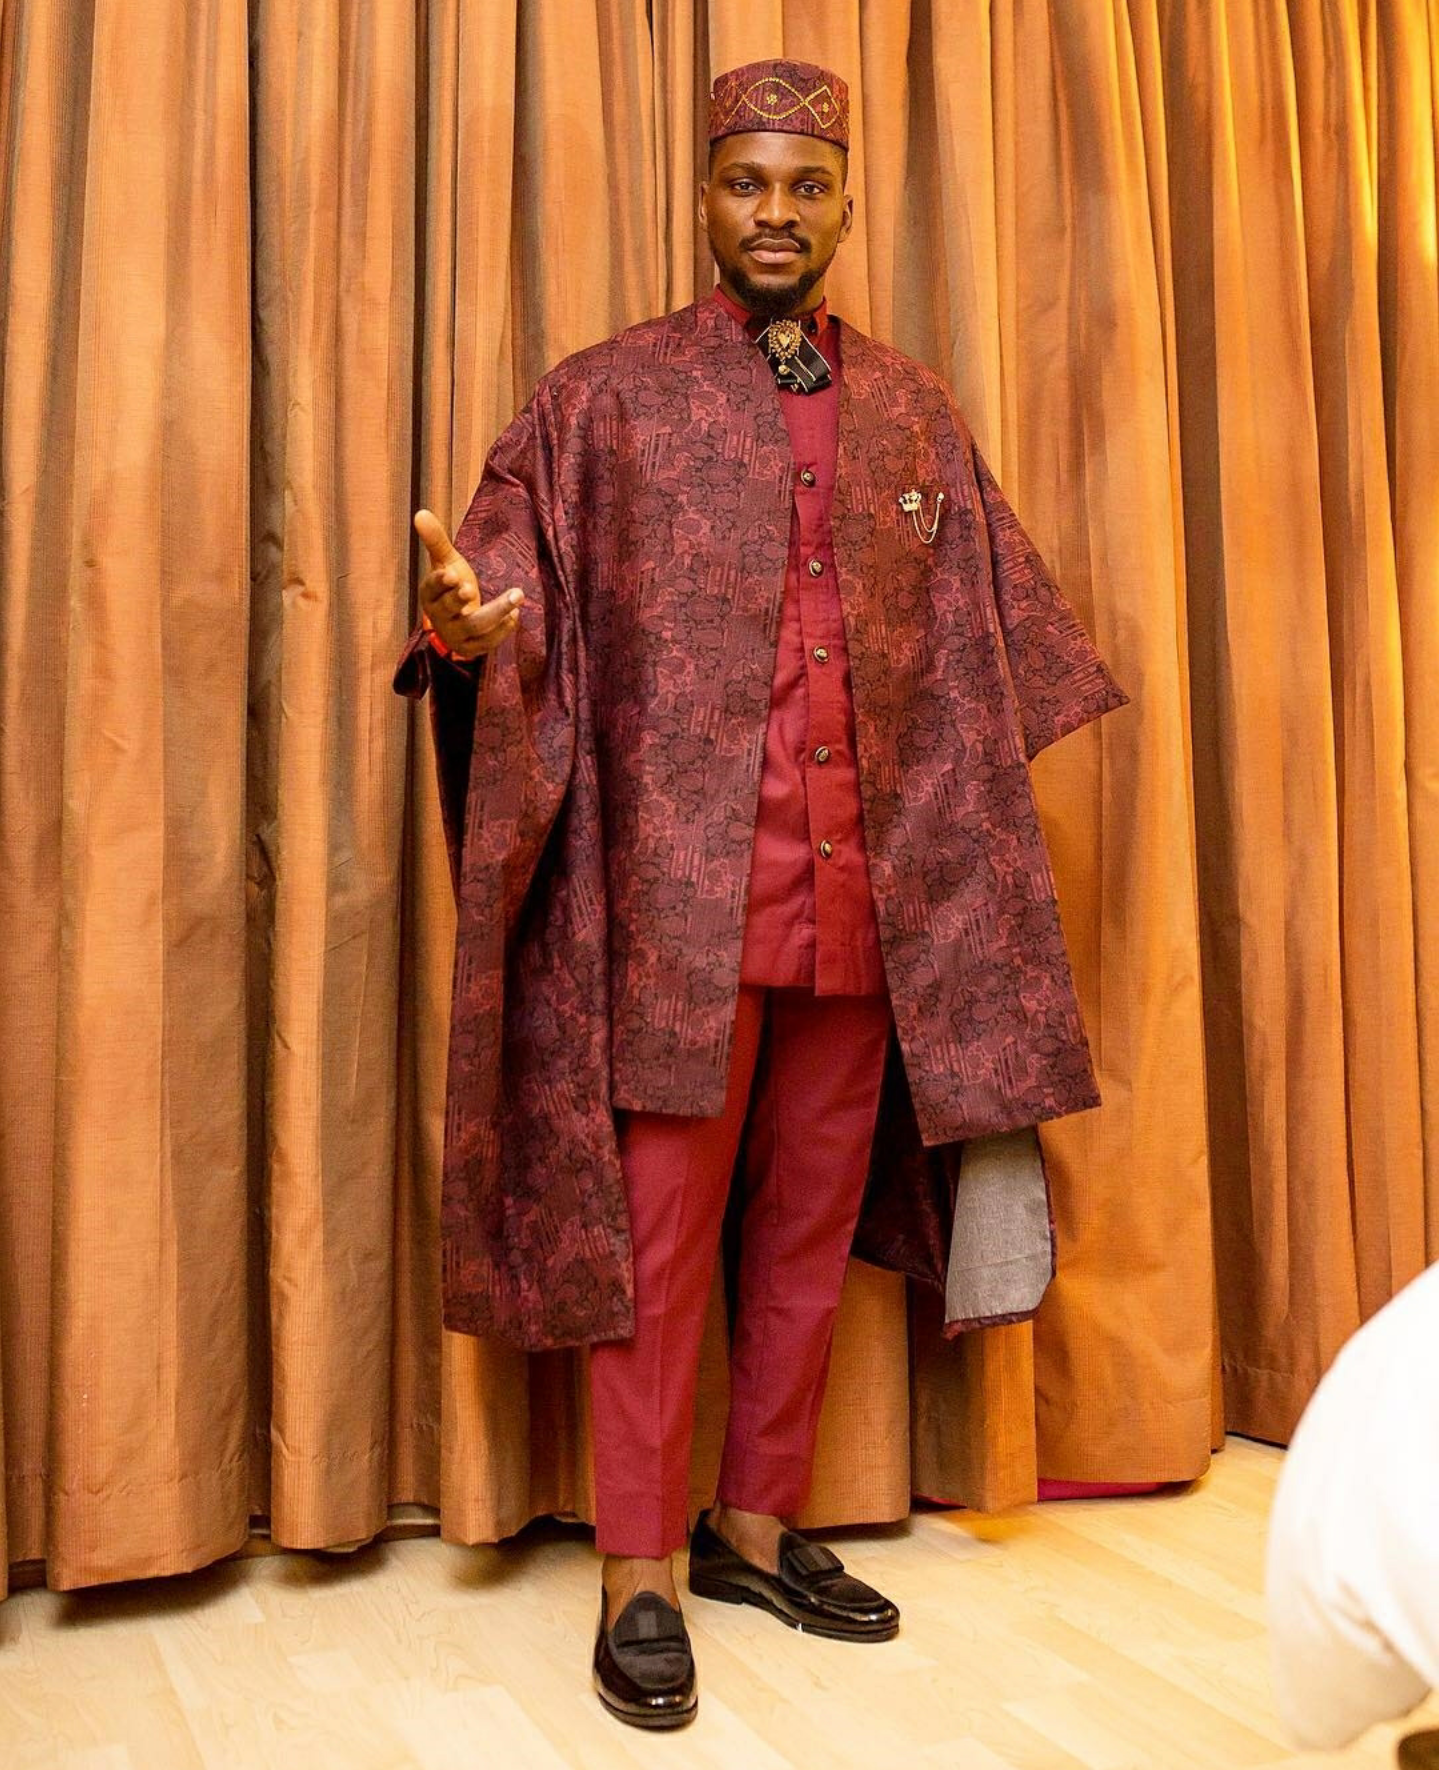 Tobi served a look in this agbada outfit